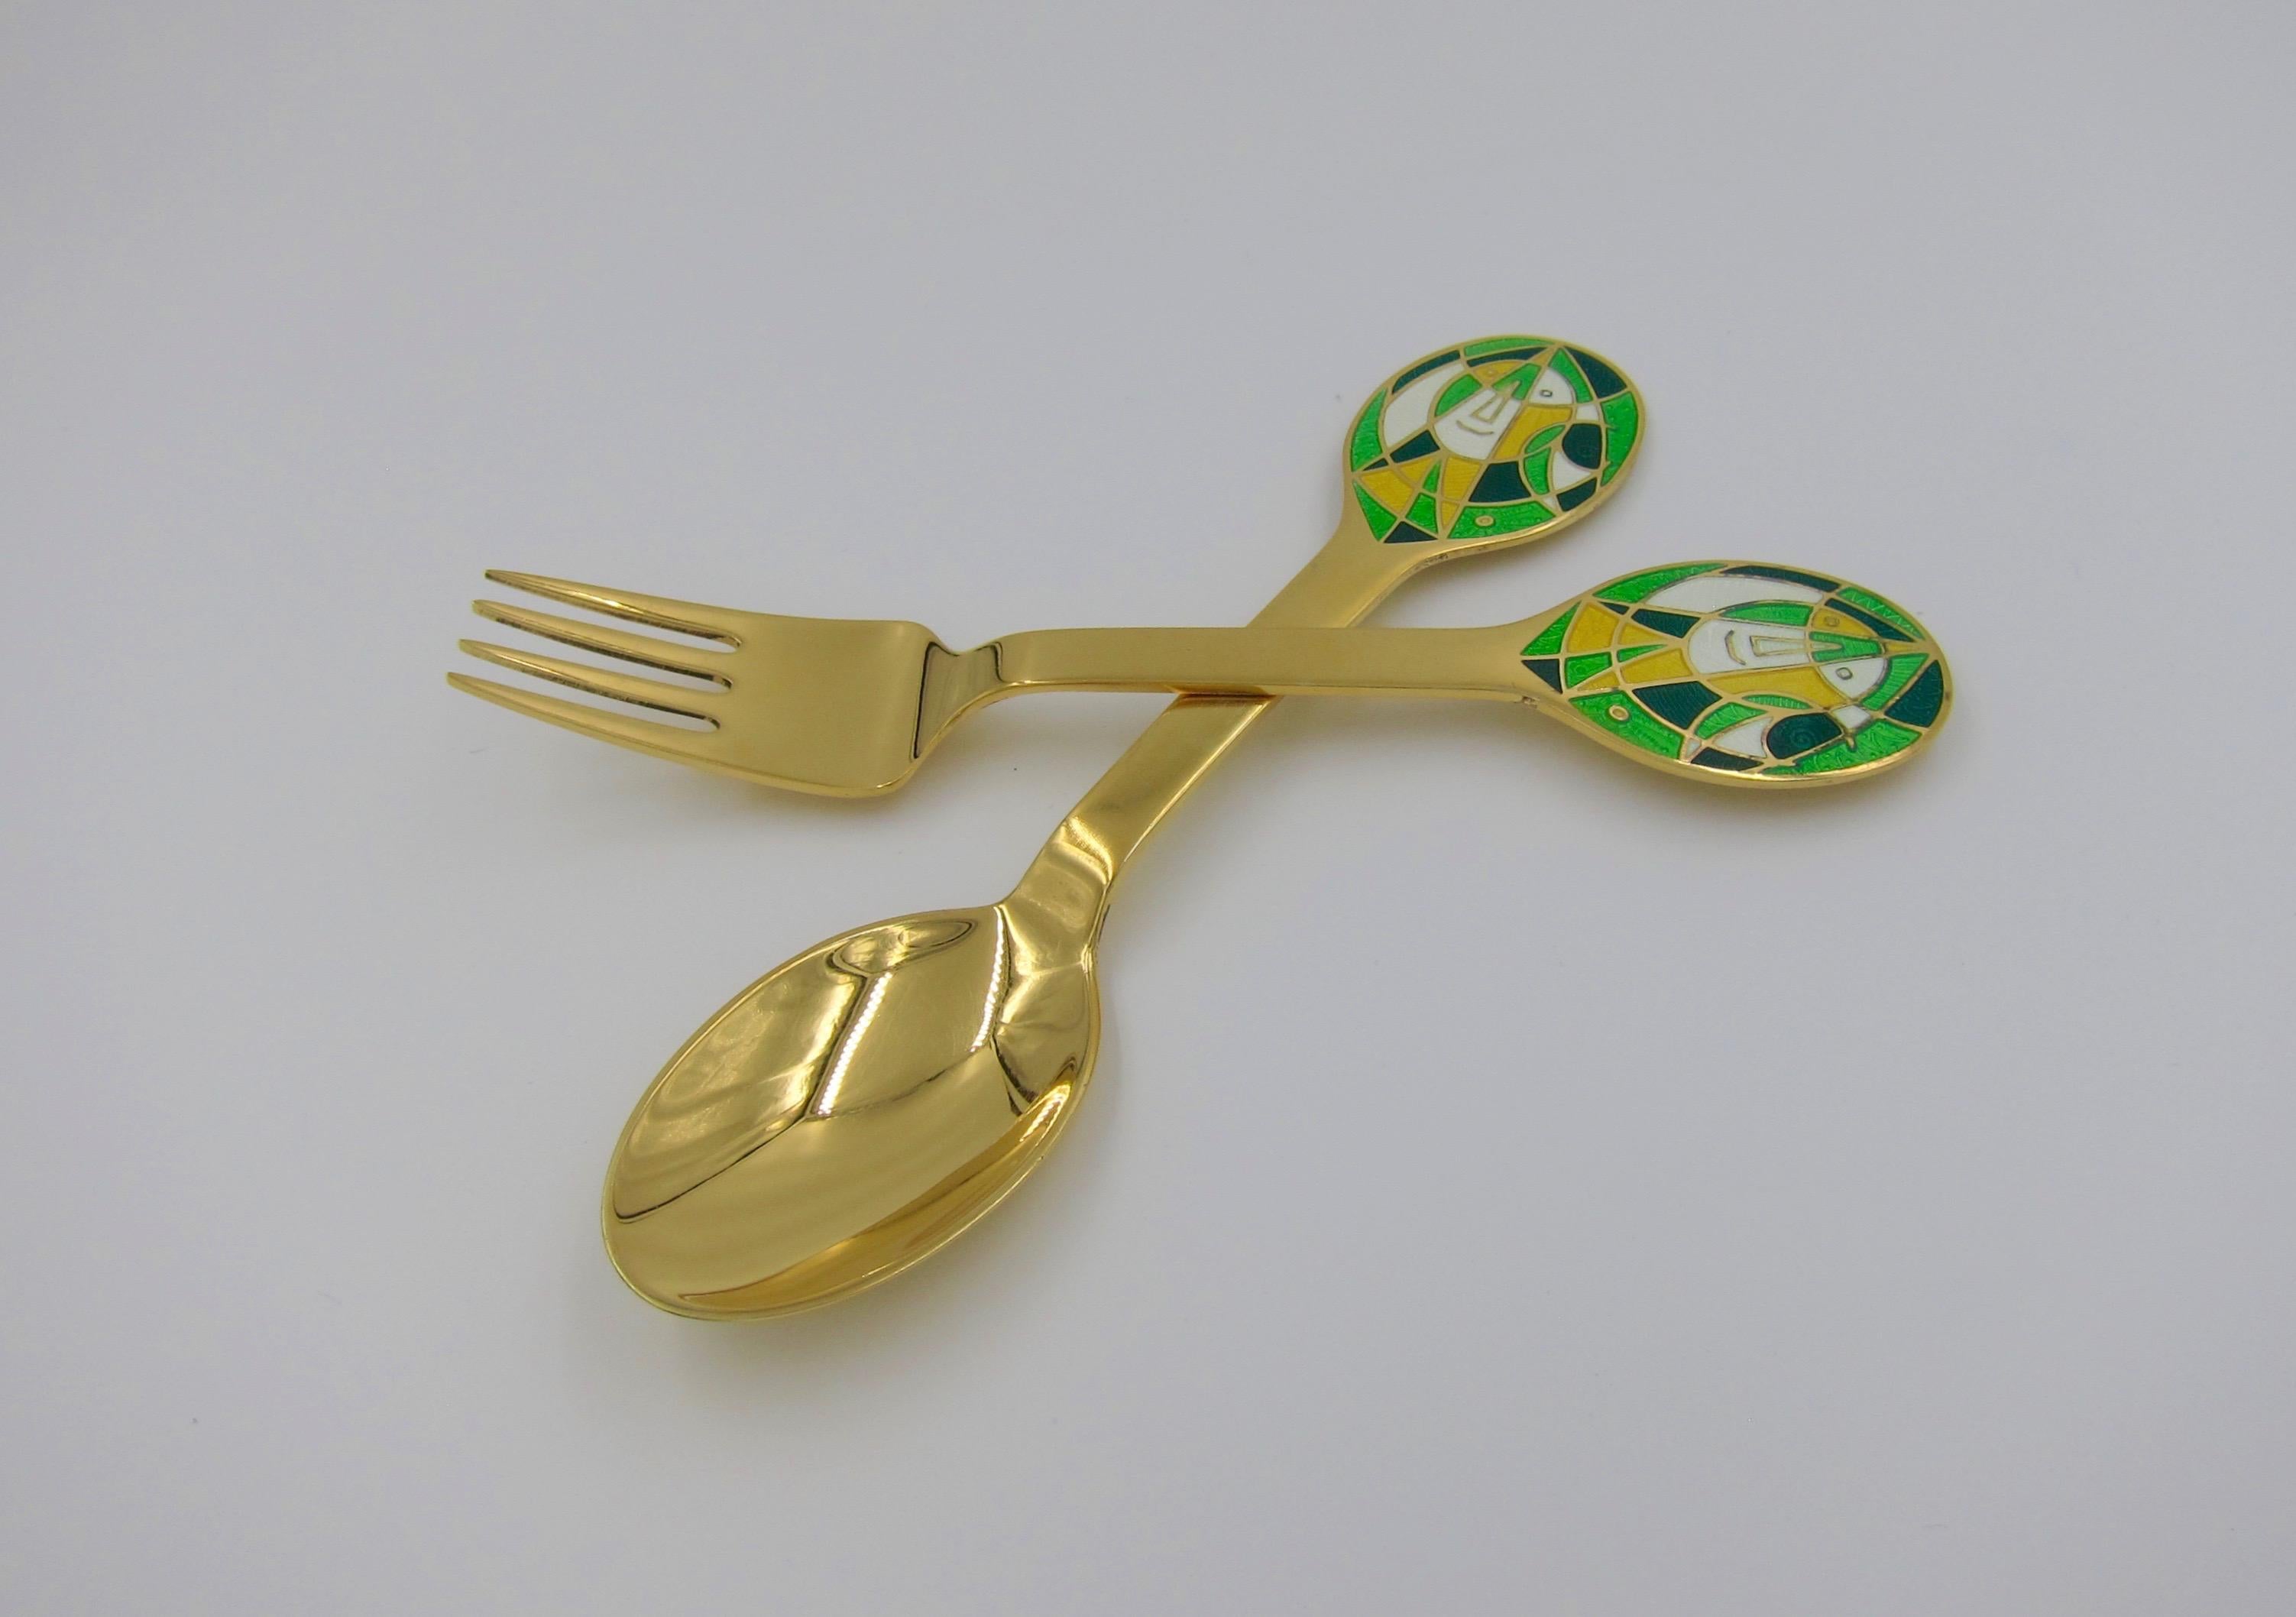 Danish Anton Michelsen Gilded Silver and Enamel Christmas Fork and Spoon Set, 1980